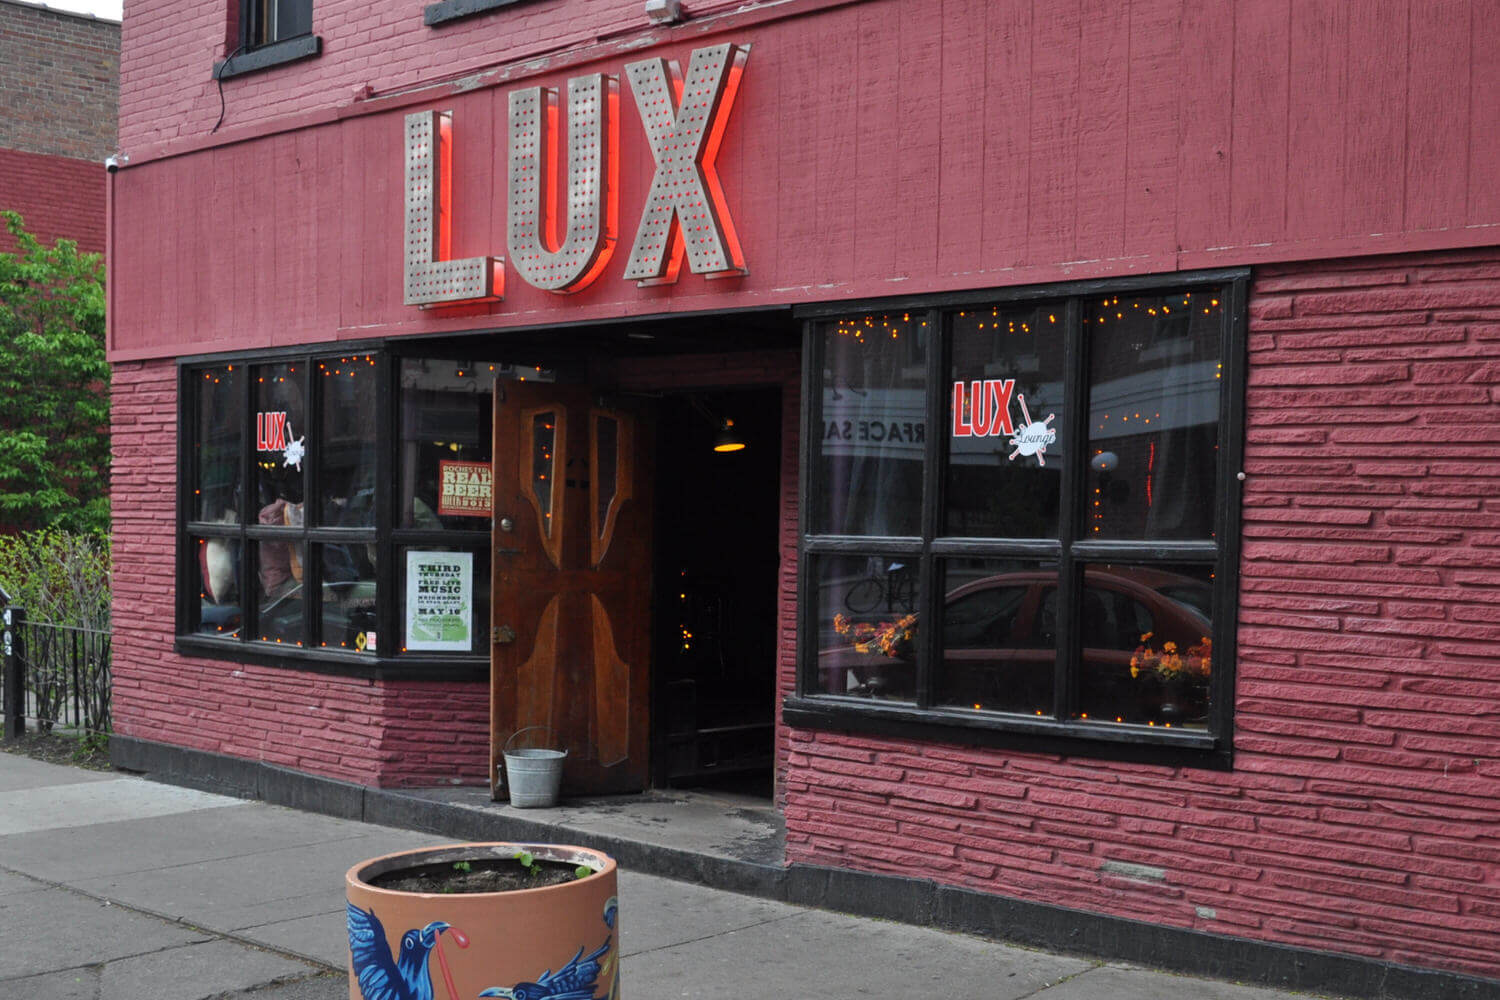 Across the street from South and Hickory Place, you'll find The Lux Lounge -- a bar featuring a big back yard, fire pit, and pool table.